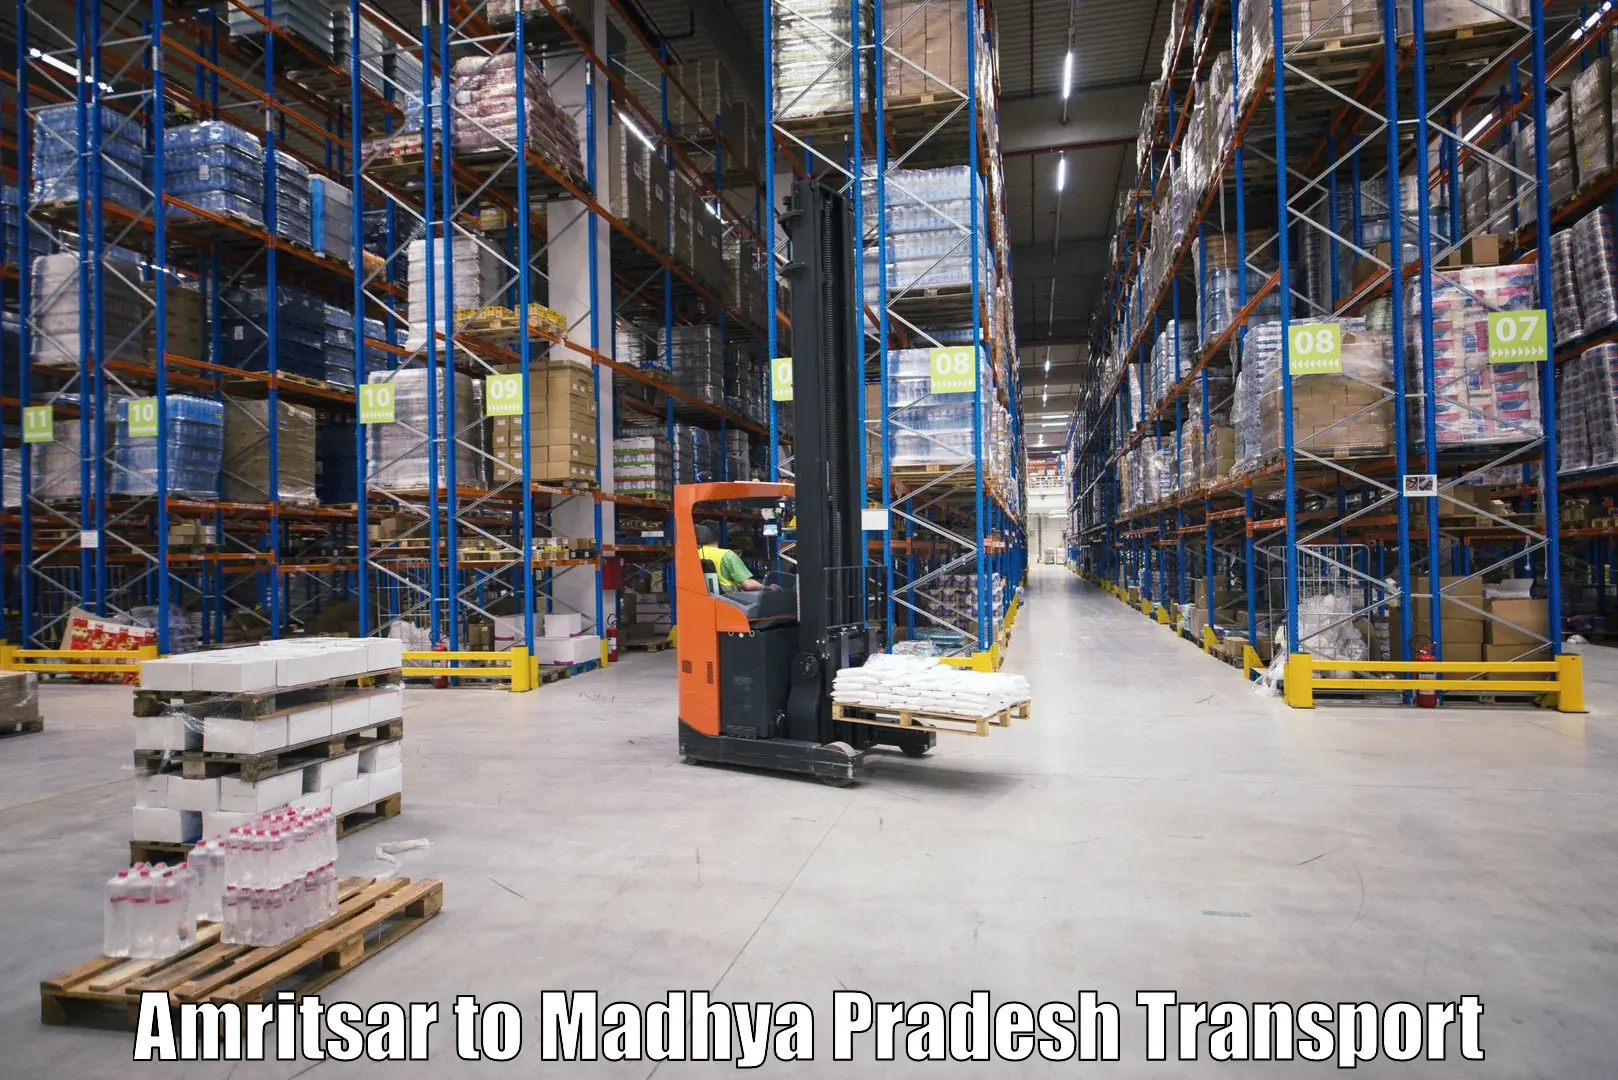 Daily parcel service transport in Amritsar to Betul